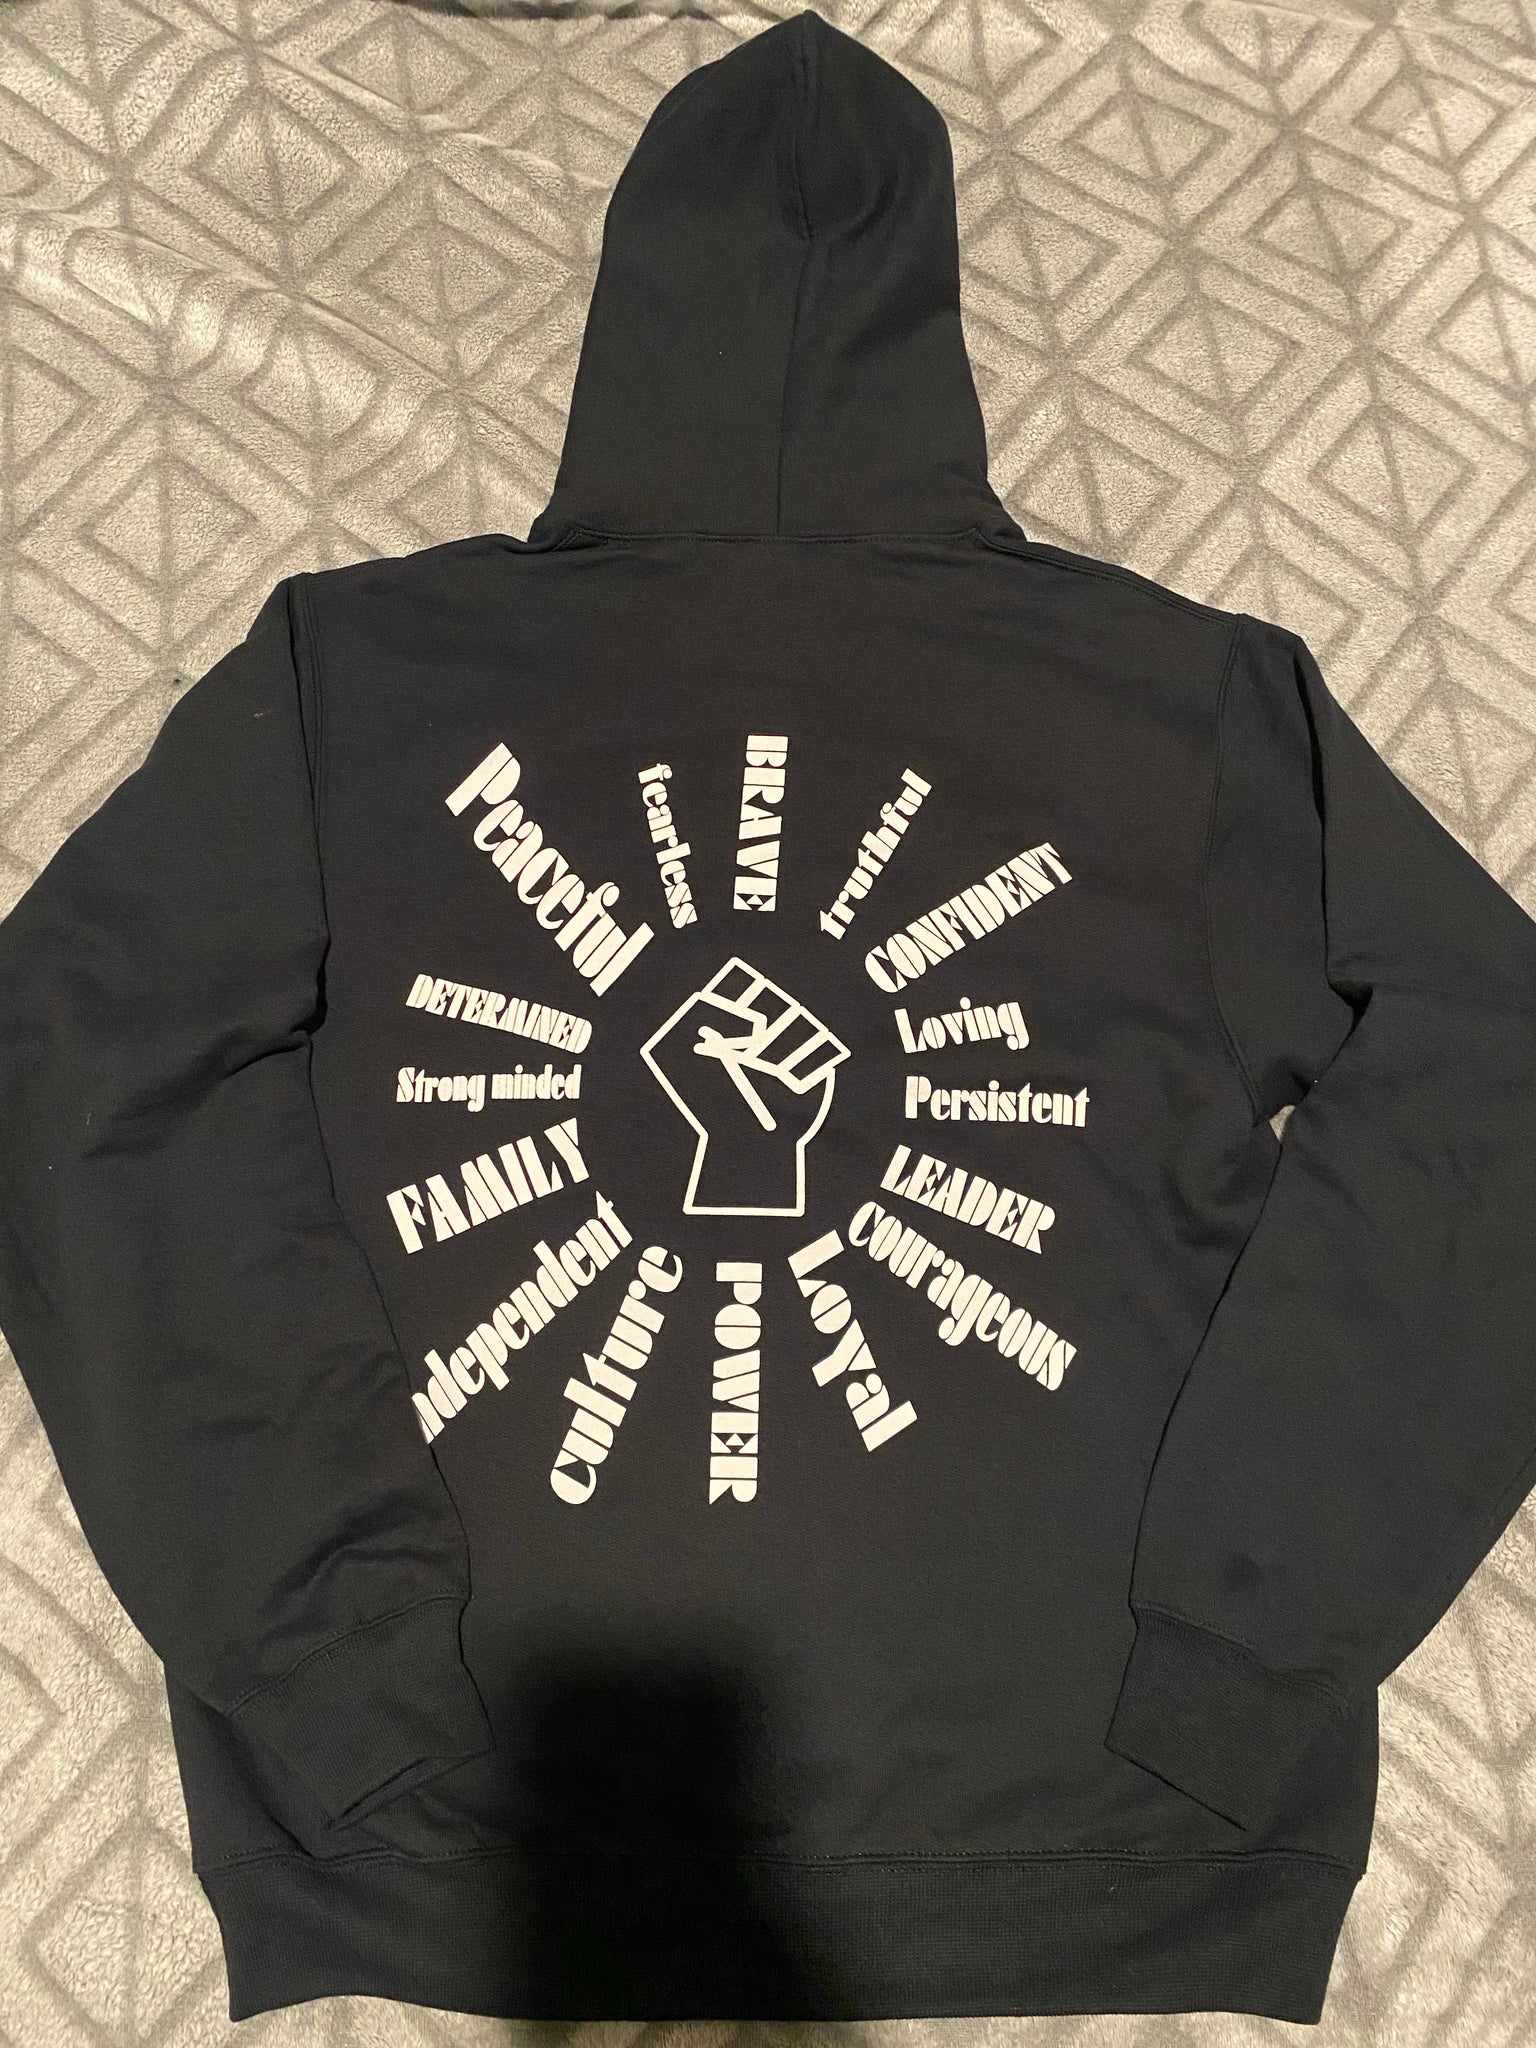 It’s us being black for me hoodie - The Drafts